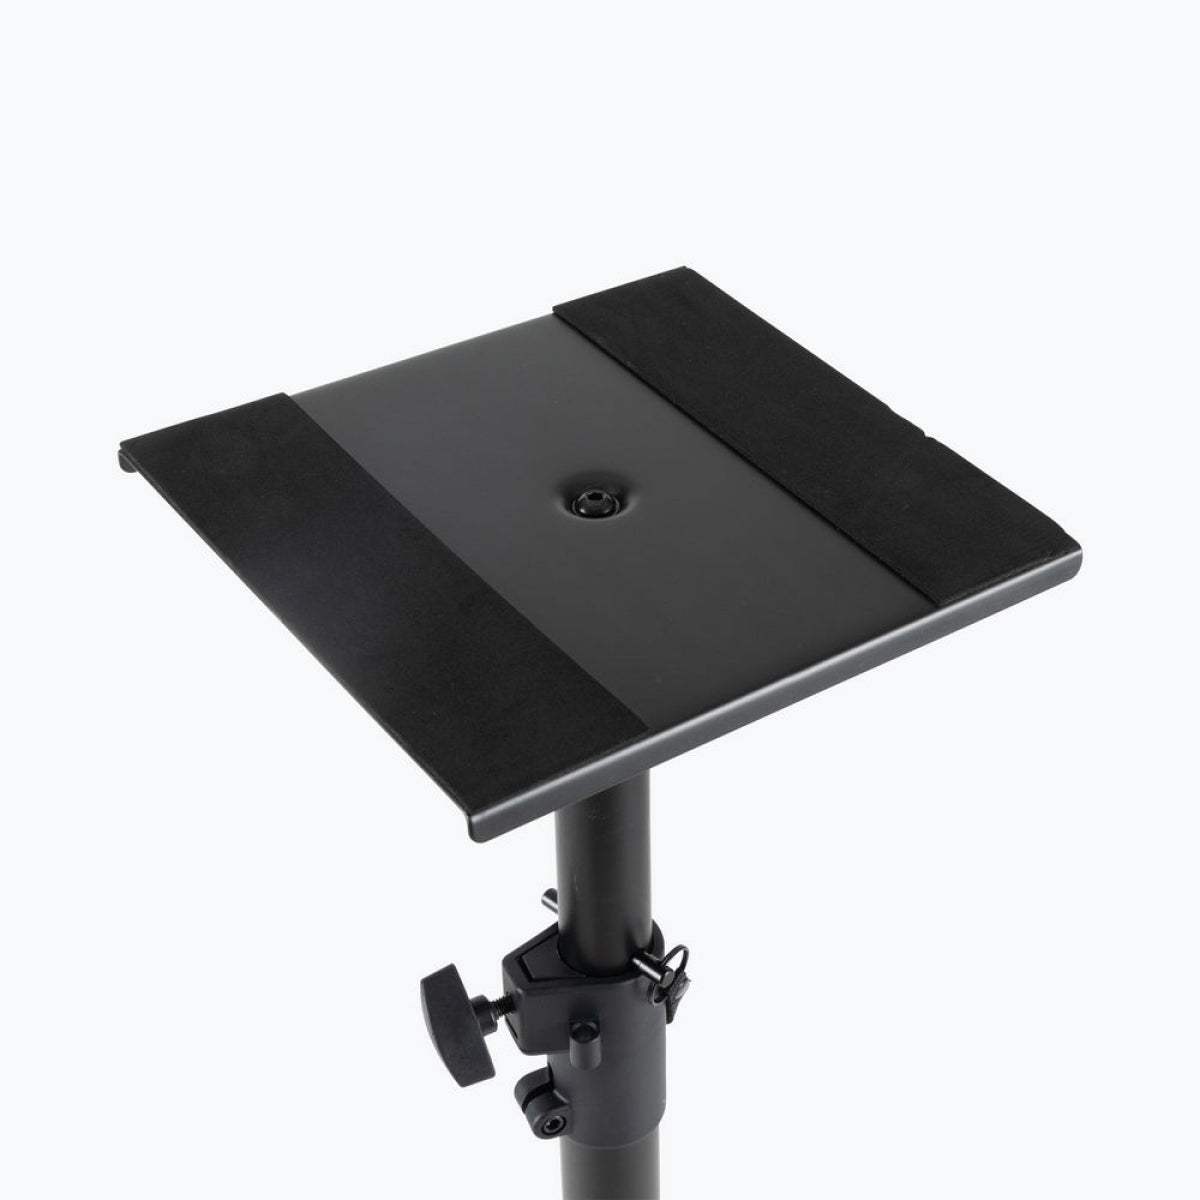 On-Stage SMS6000-P Studio Monitor Stands (Pair)